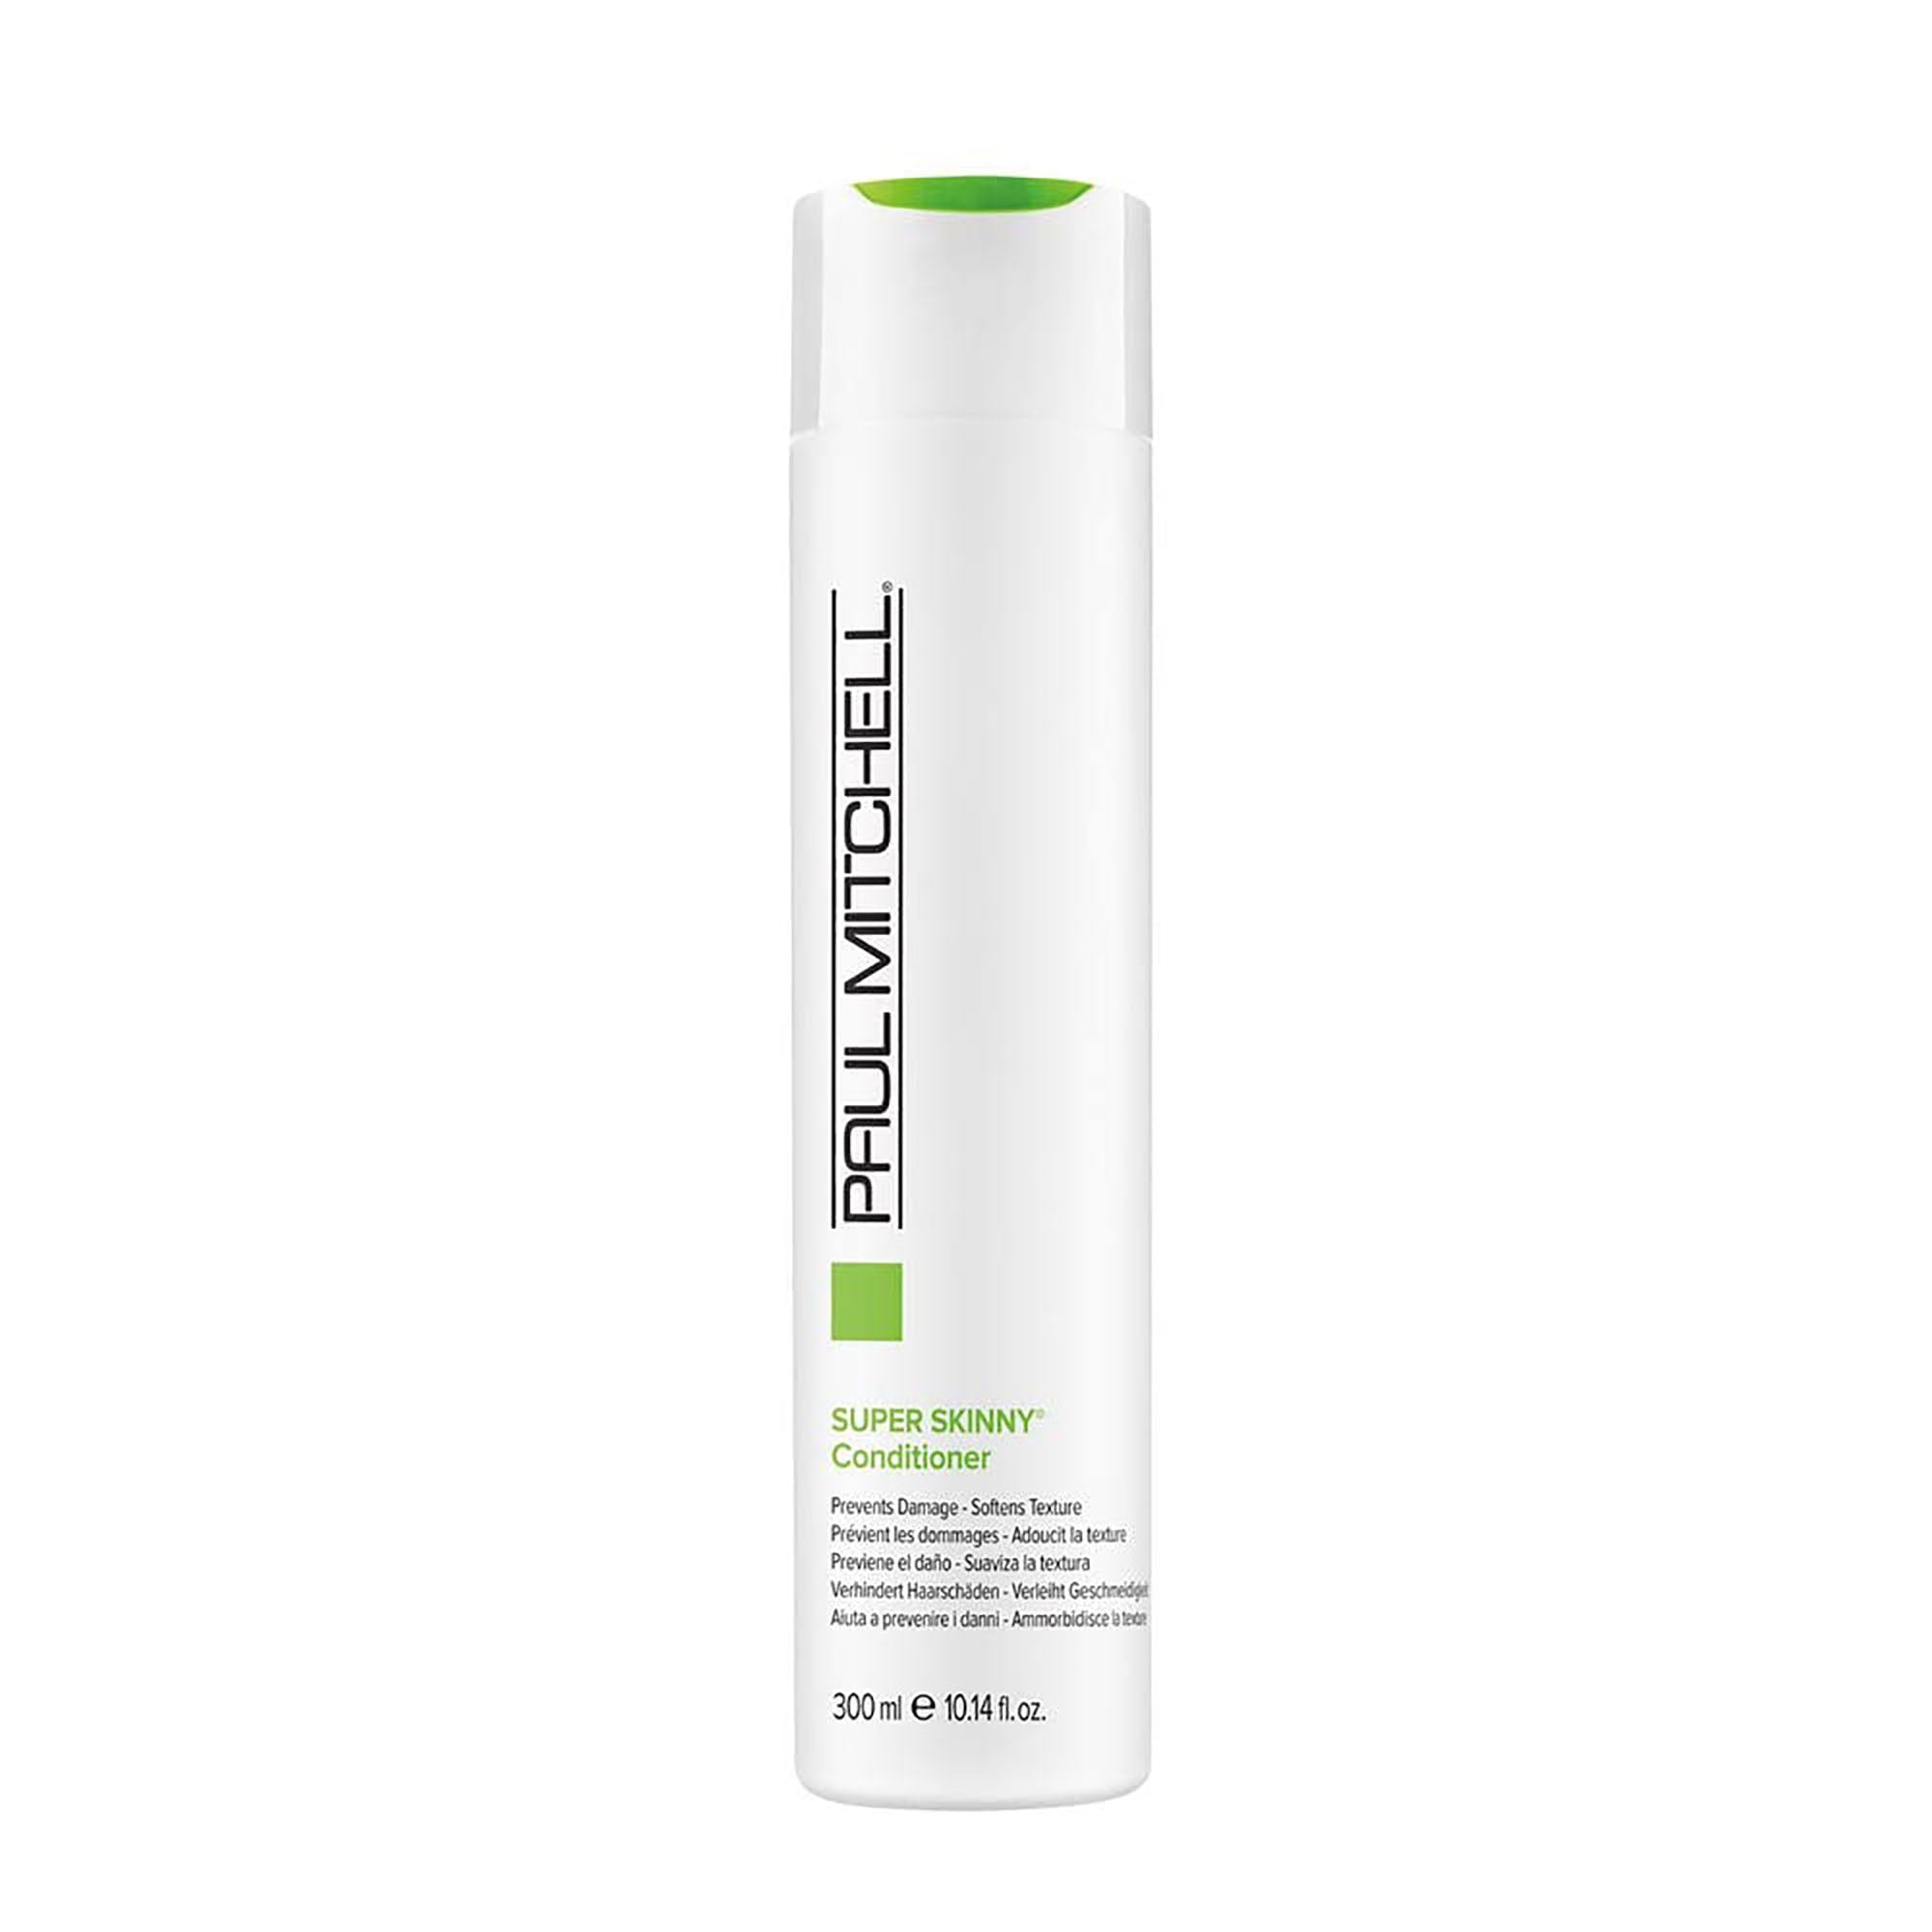 Paul Mitchell Smoothing Super Skinny Conditioner / 10.14